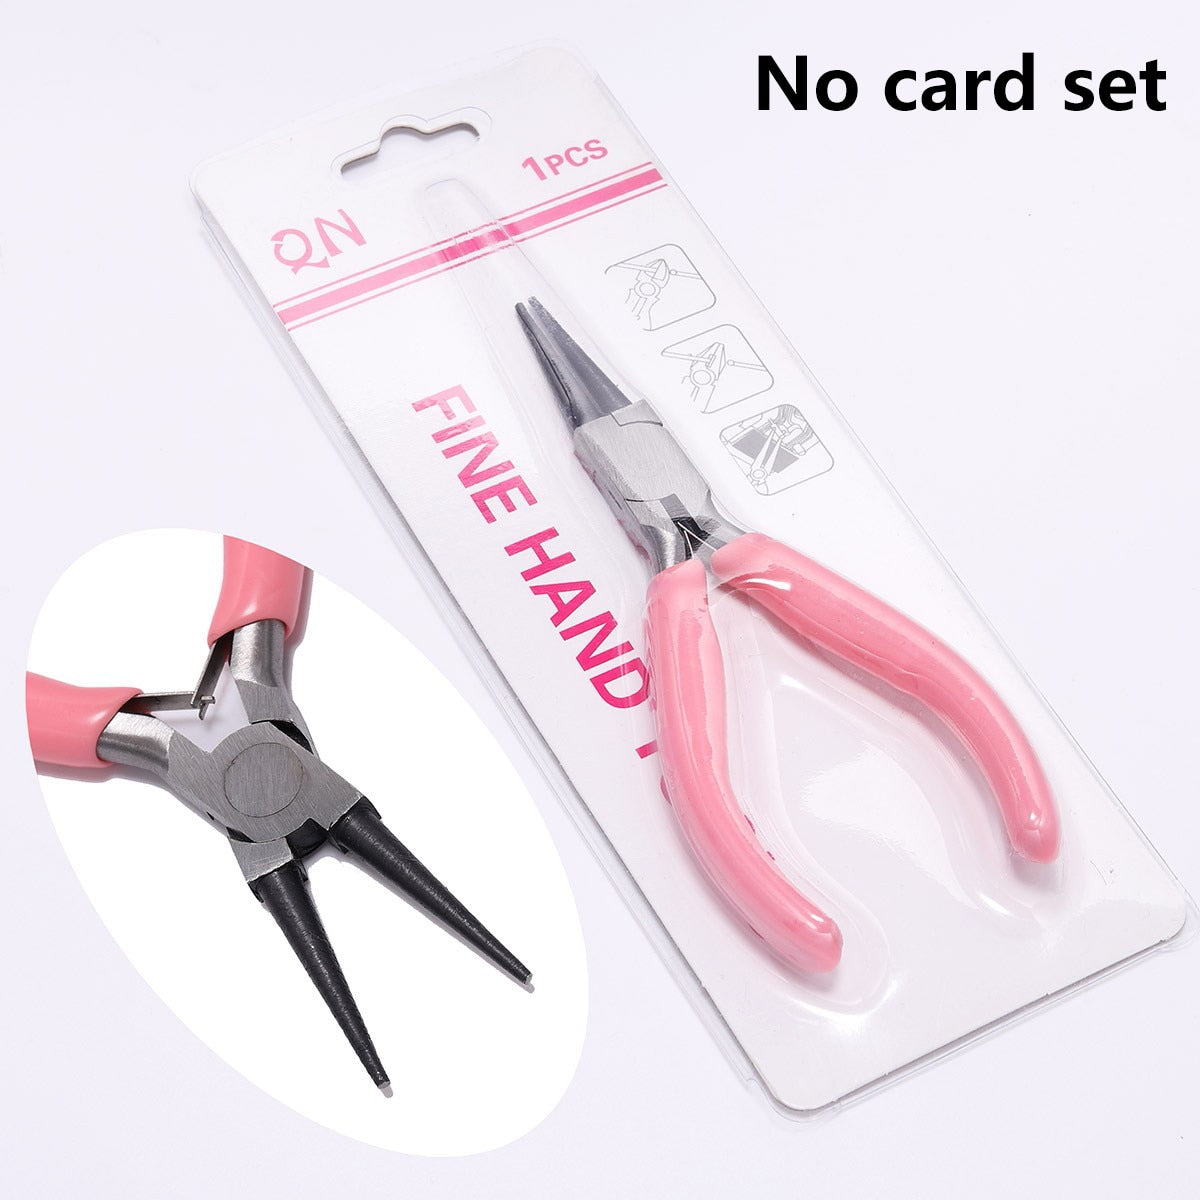 Round Nose End Cutting Jewelry Pliers for Crafting